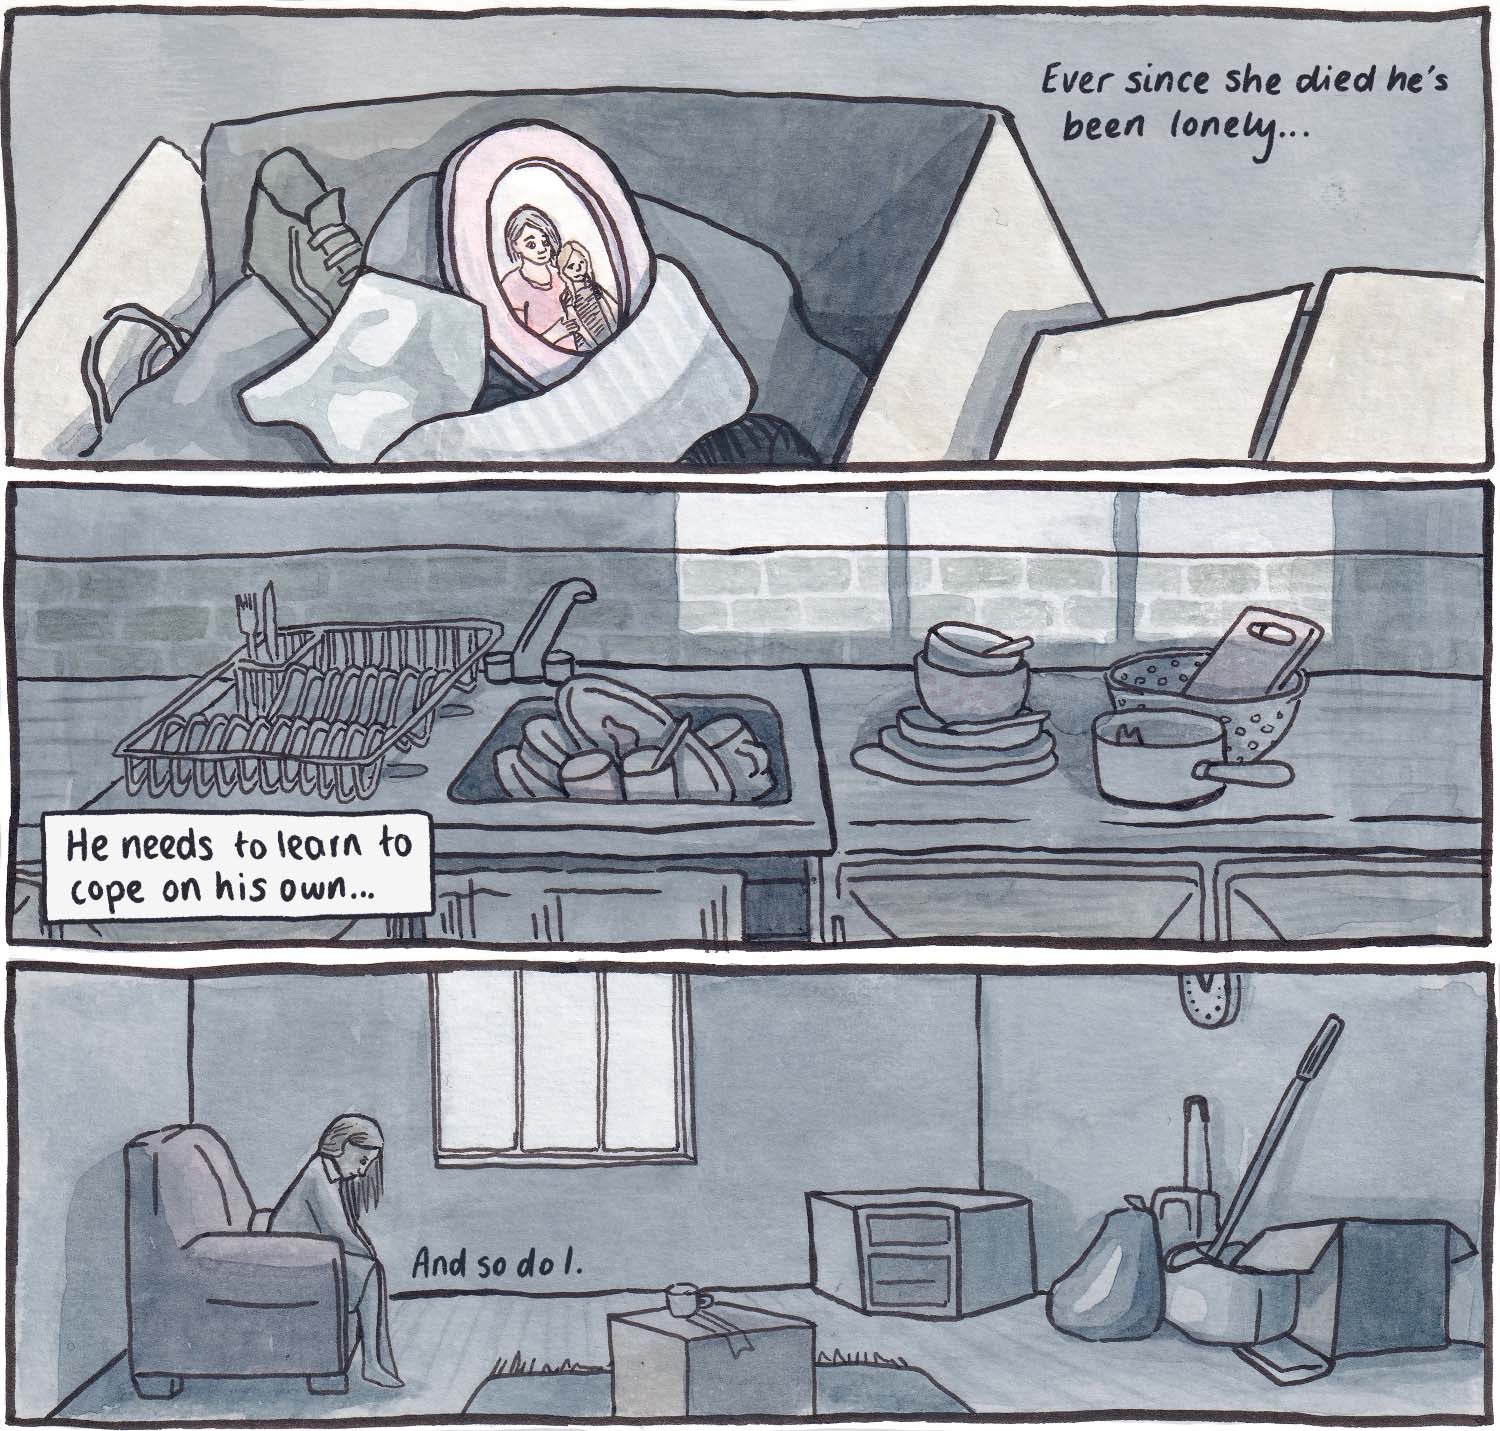 Series of panels from web comic 'Always Used To' showing the main character's unkept living situation and turmoil with leaving her father alone after her mother's death.